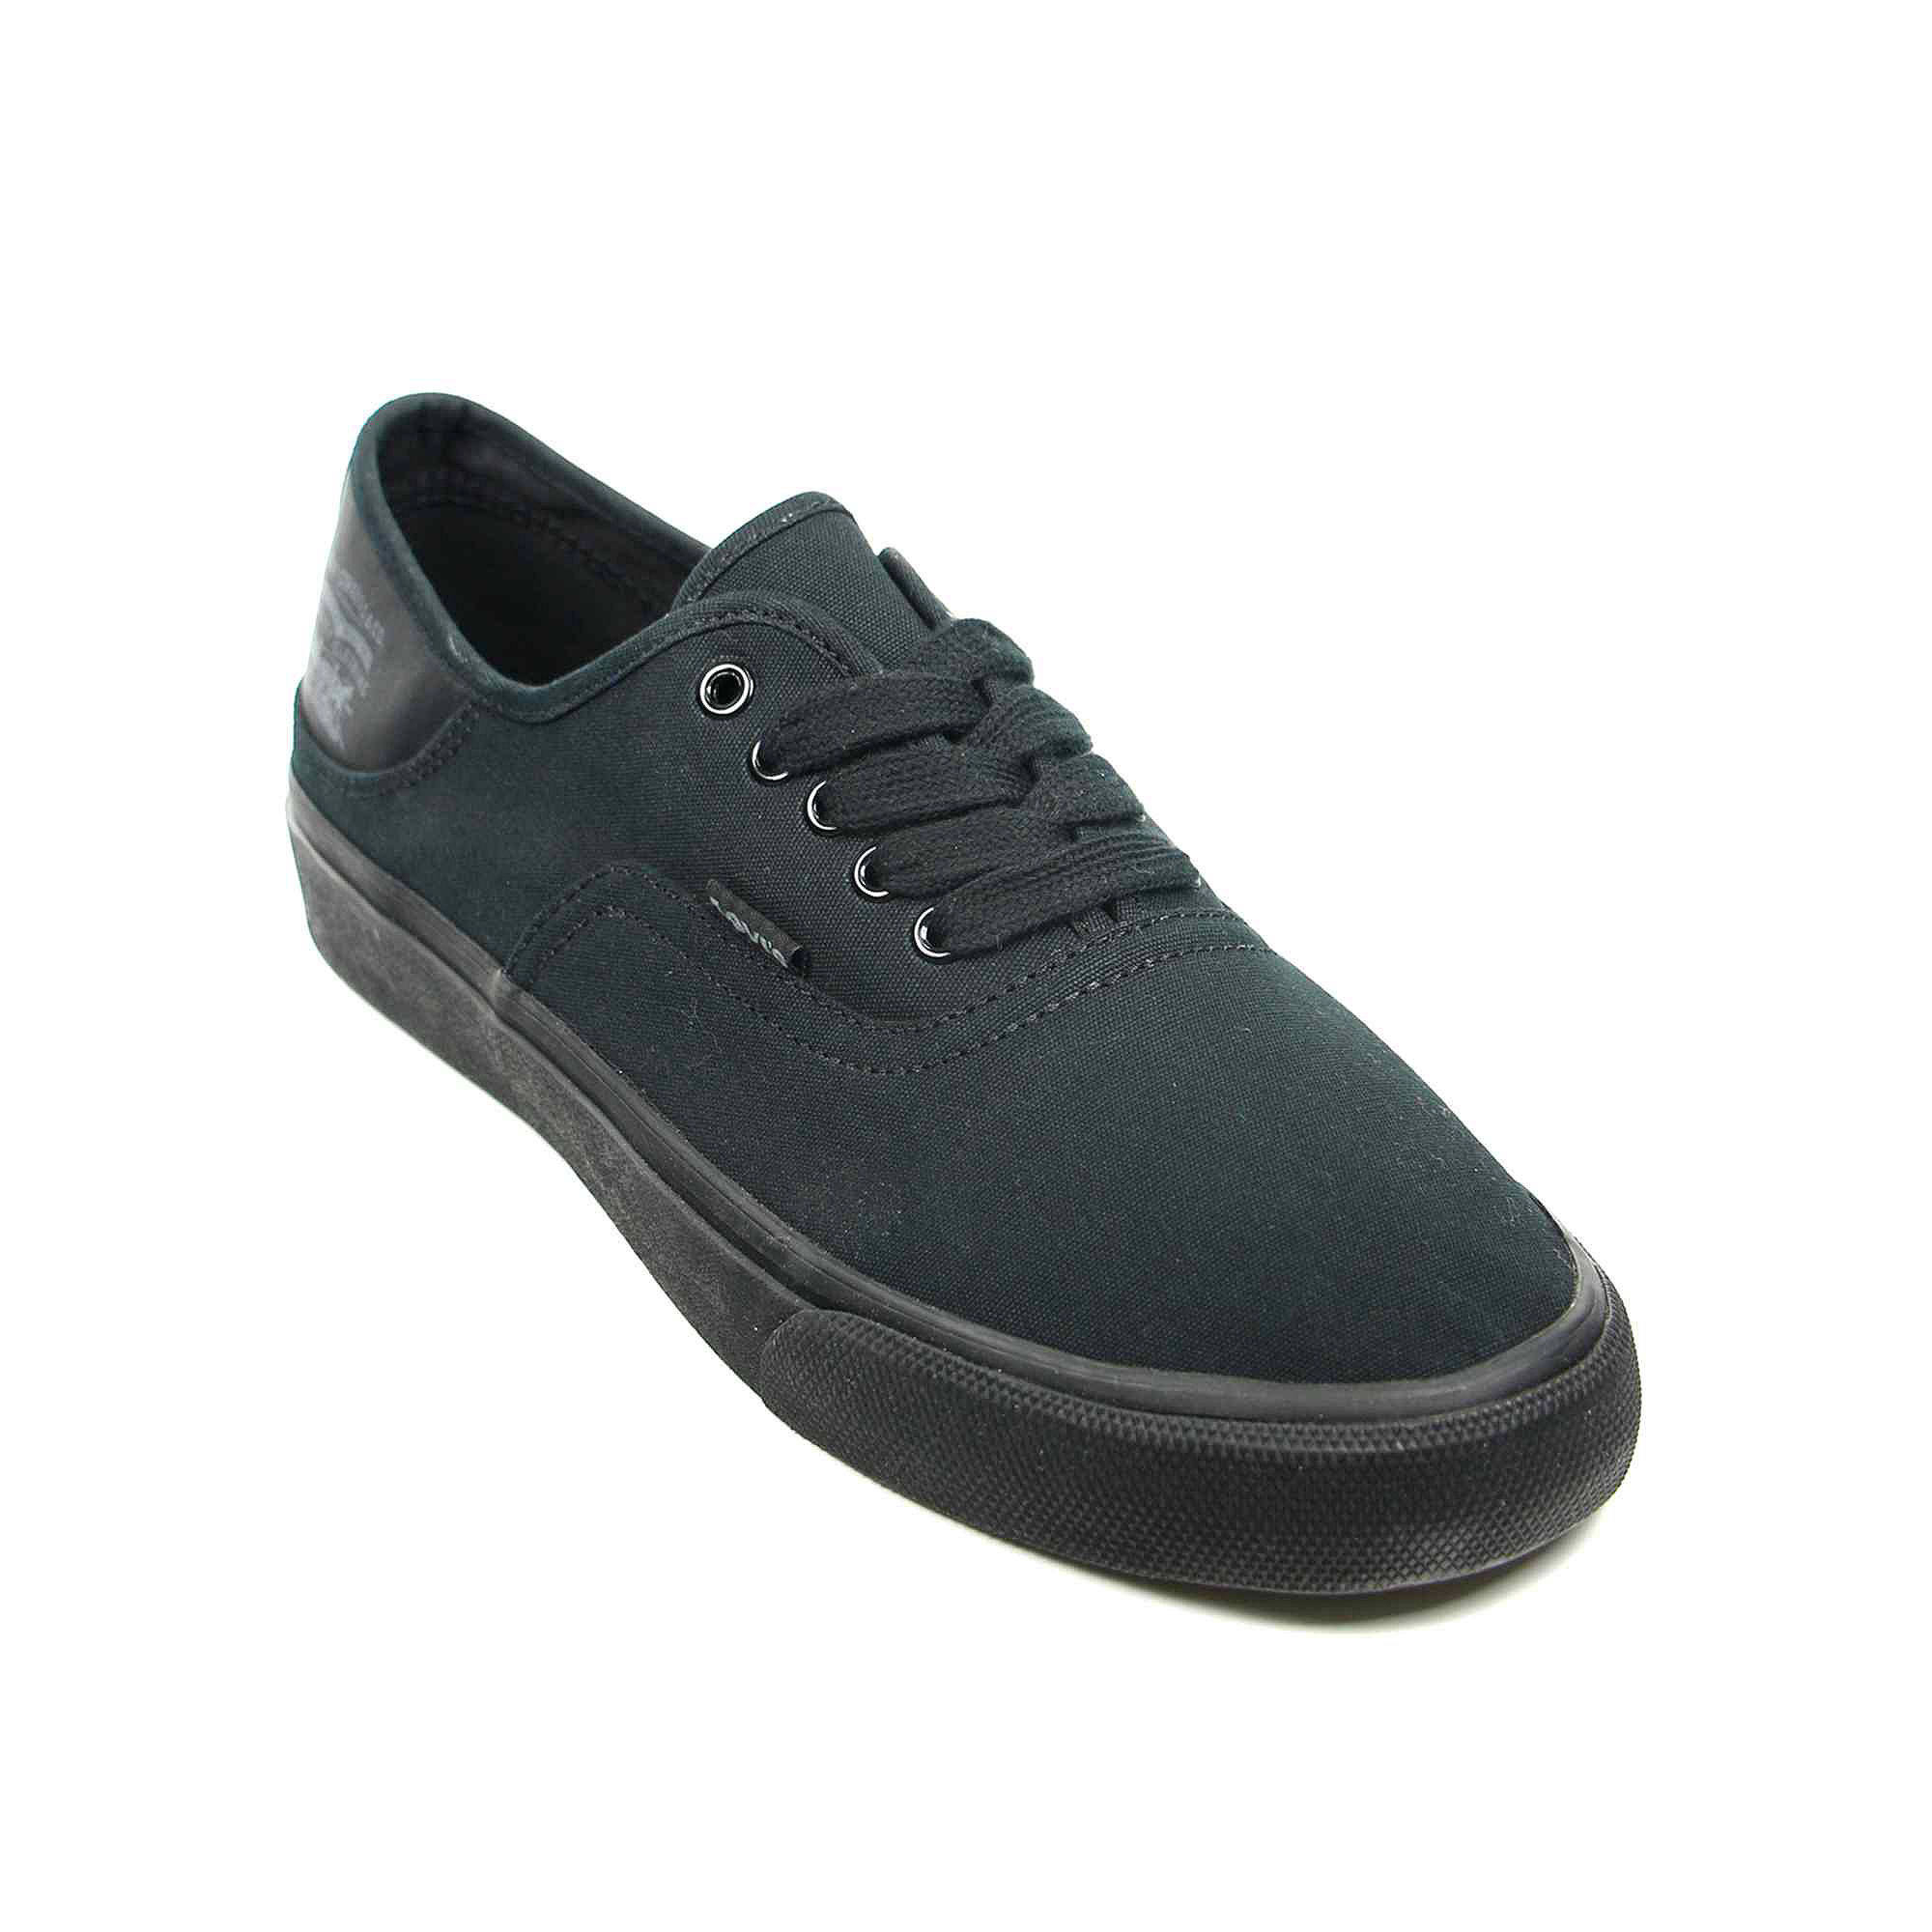 UPC 887326867926 product image for Levis Jordy Buck Mens Sneakers | upcitemdb.com